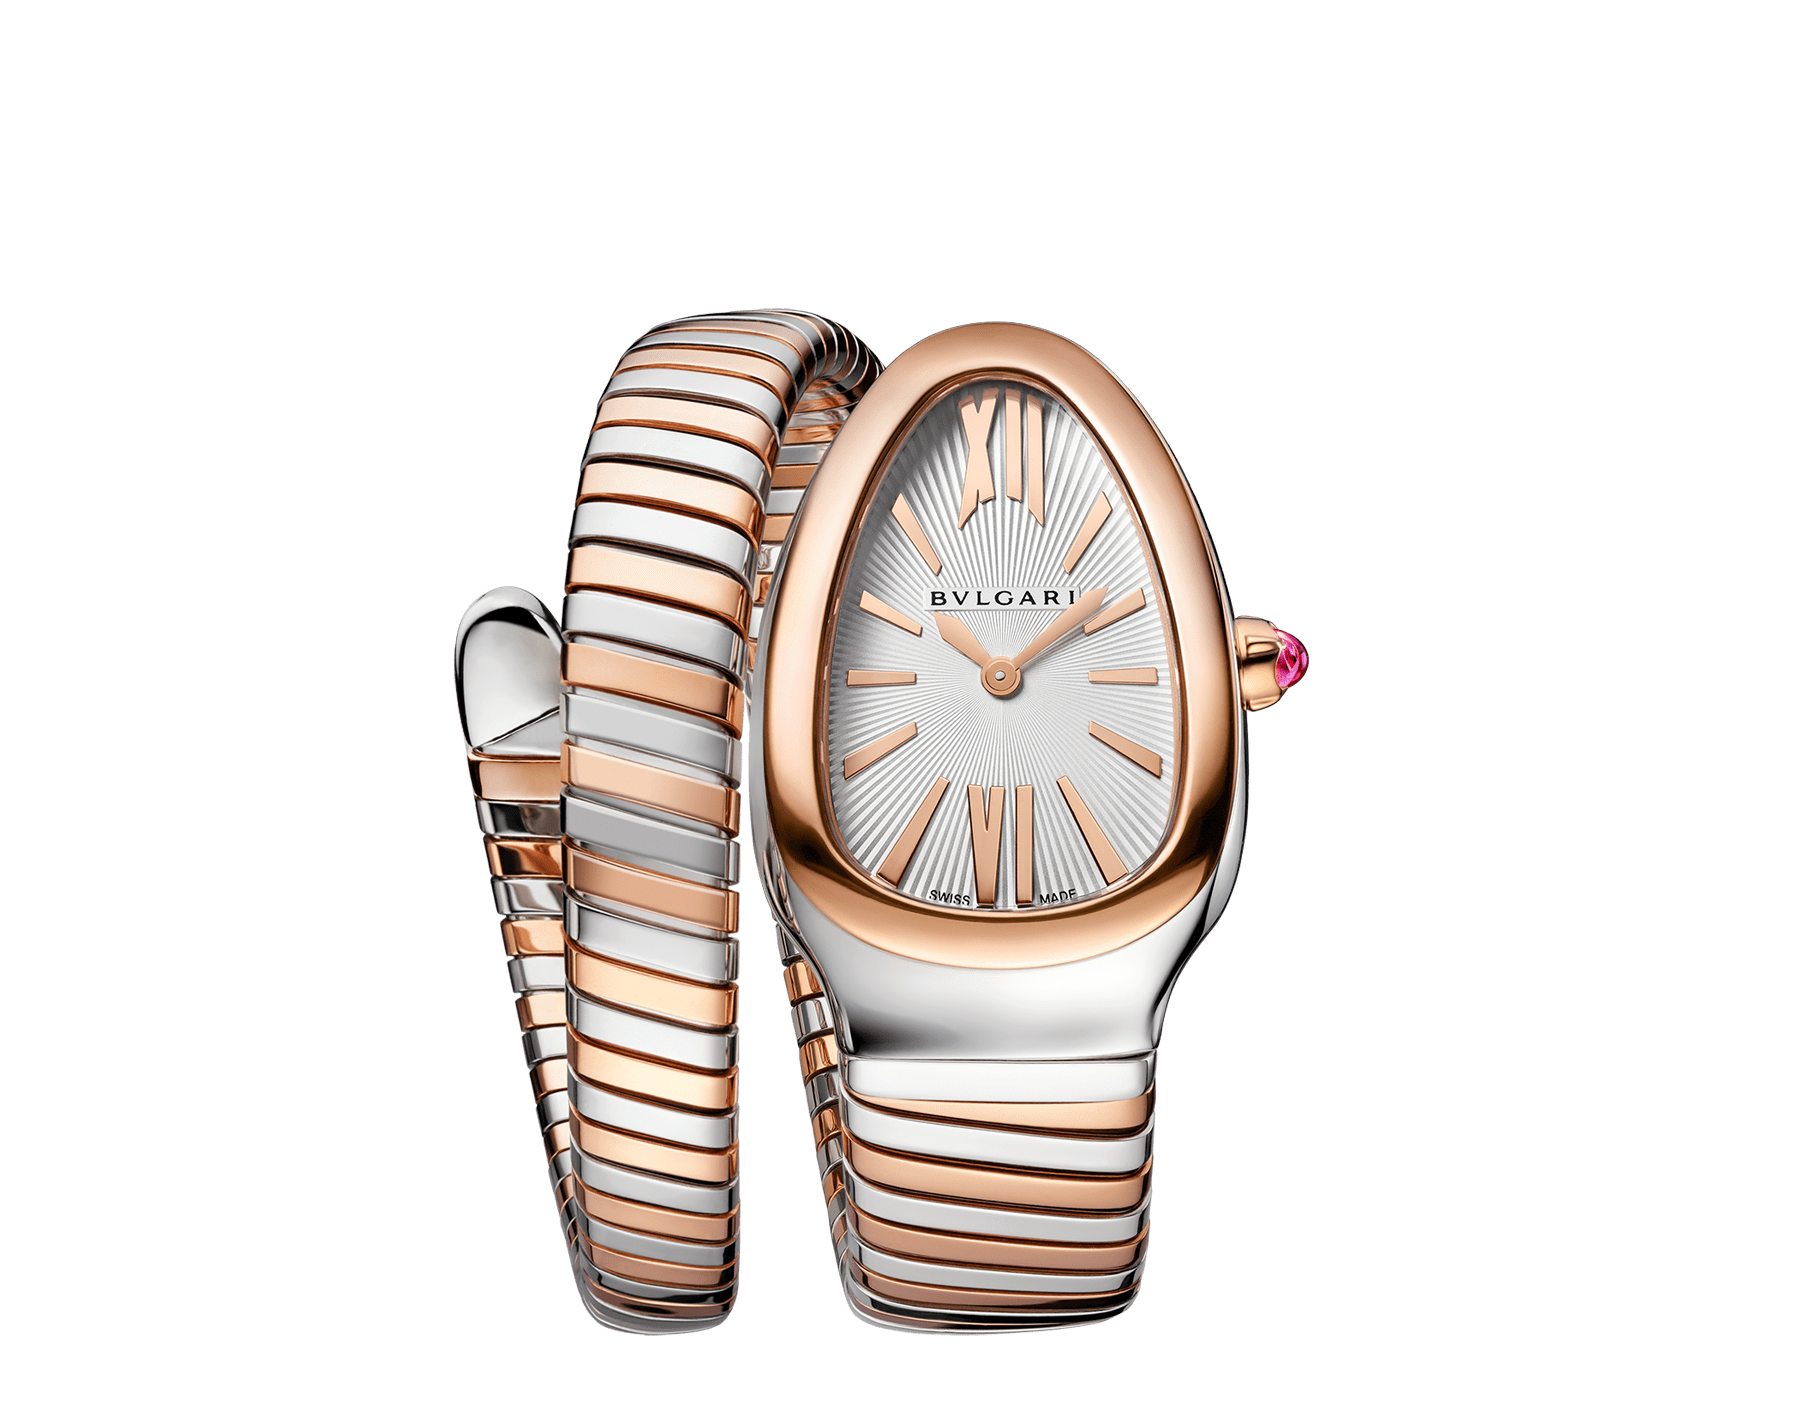 Serpenti Tubogas single-spiral watch in 18 kt rose gold and stainless steel with white opaline dial with guilloché soleil treatmen. Water-resistant up to 30 metres 103708 image 1